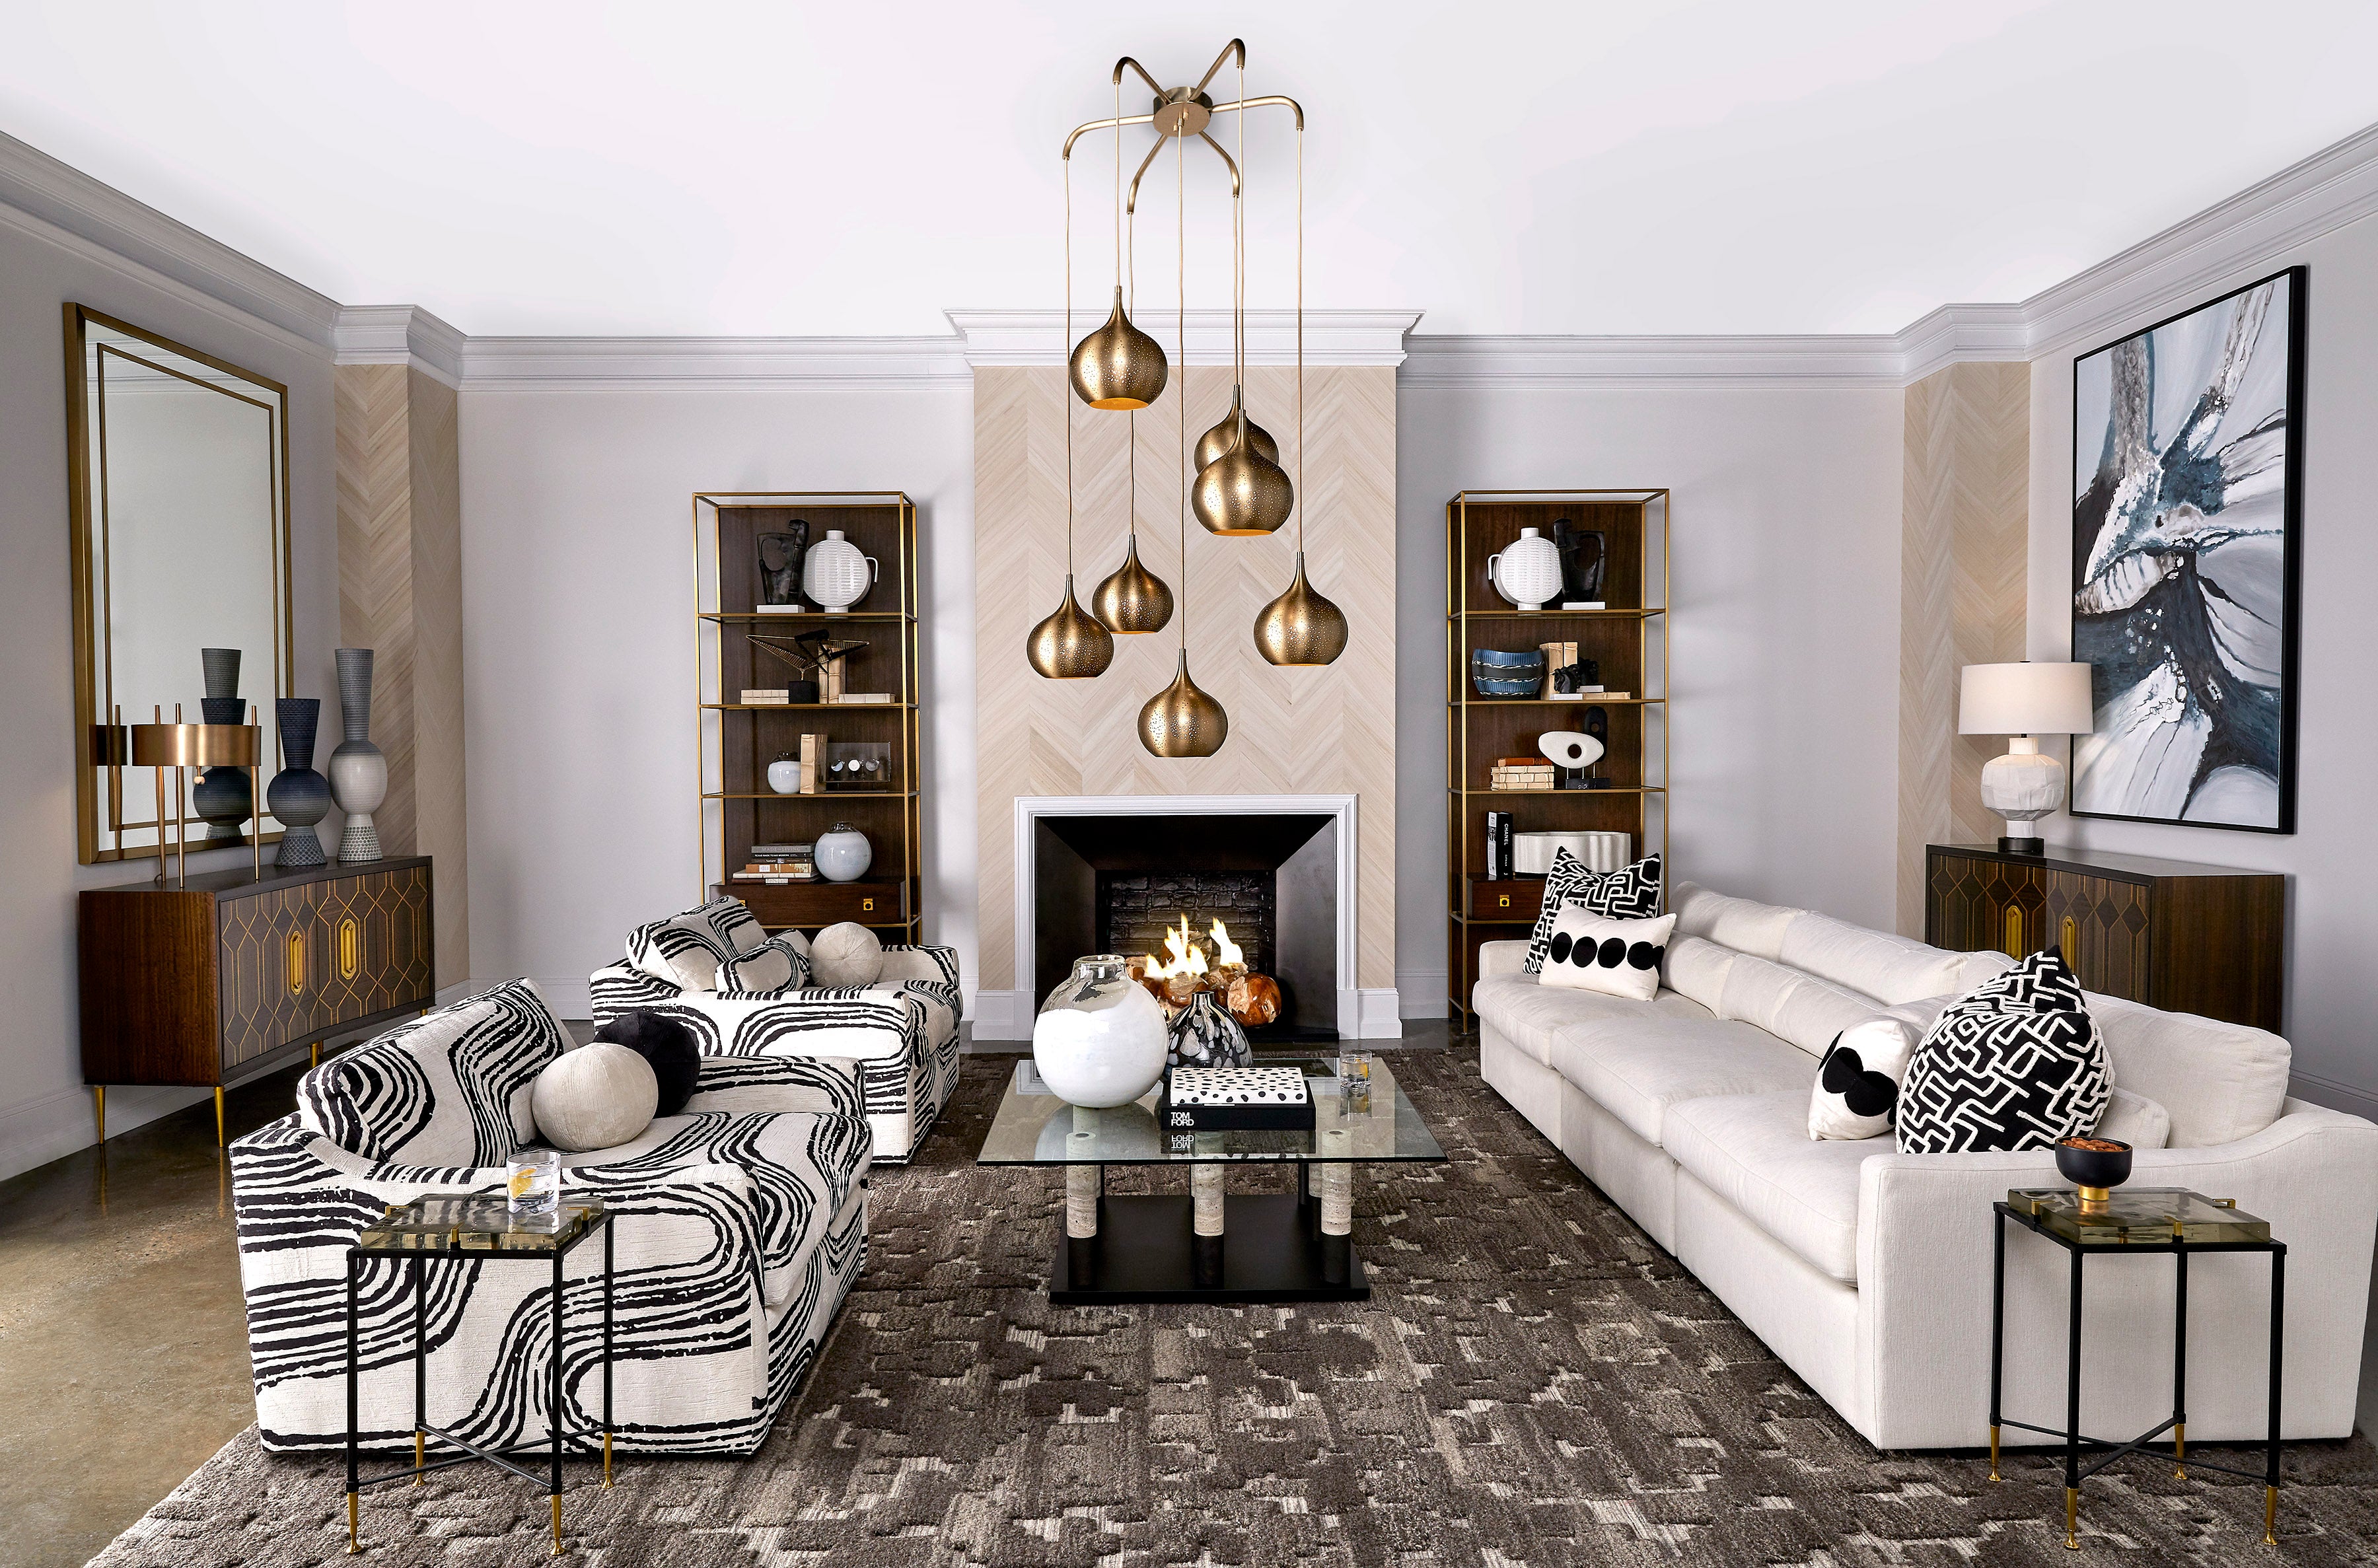 A modern living room with a white sofa across from two black and white geometric print arm chairs and a glass coffee table in between. A large brass chandelier hands from the ceiling while various lamps and decorative pieces litter the room.